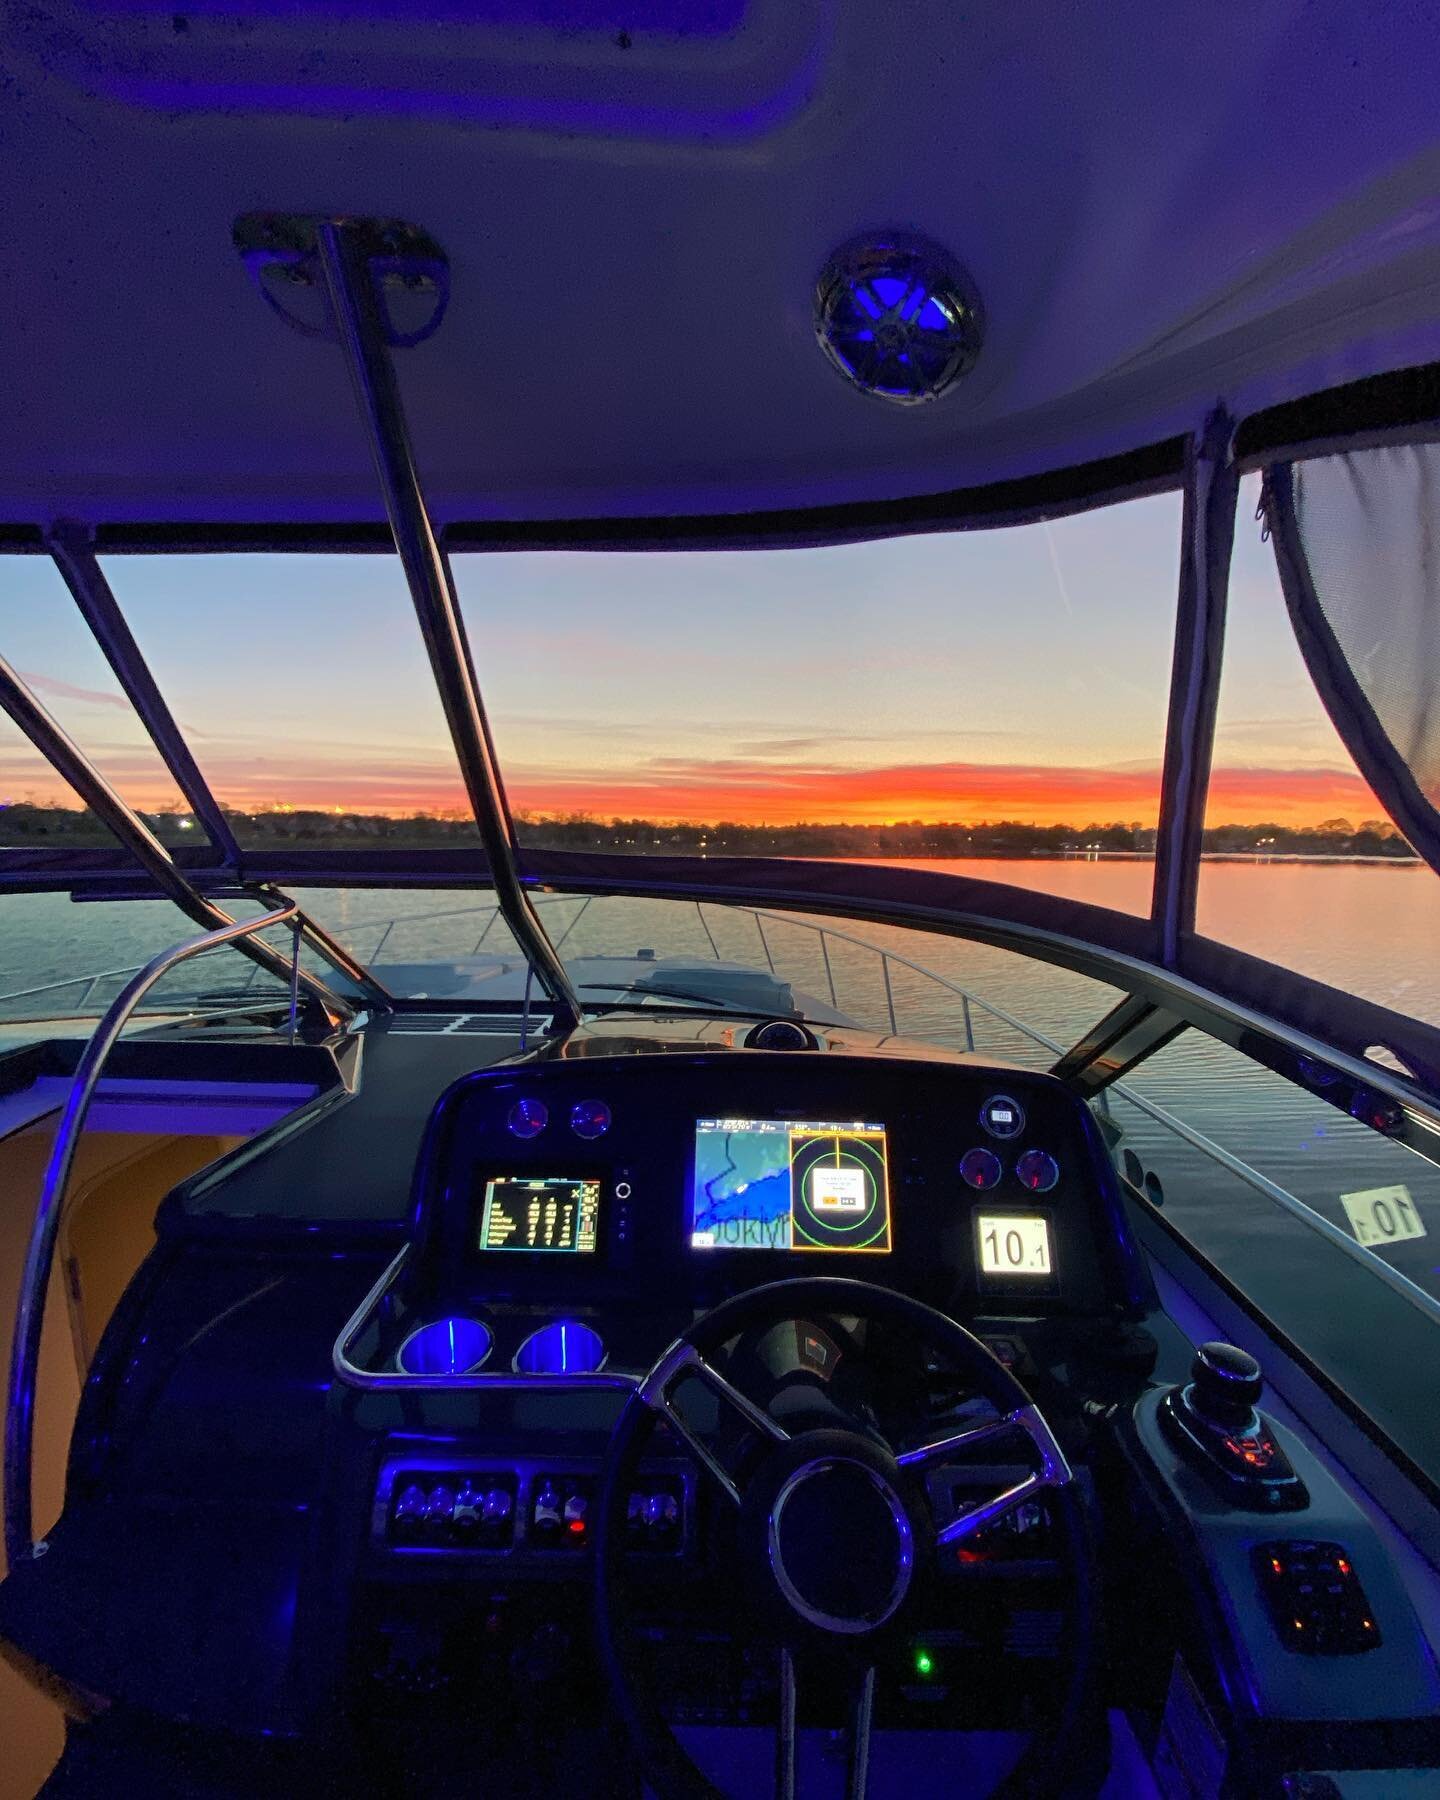 Morning sunrise delivery 🌅
.
.
Services are available in the CT, NJ and NY! Destinations may include surrounding states. Message me for specific details!
.
.
#captainforhire #boatcaptain #hamptons #claudios #greenport #shelterisland #gardinersbay #c